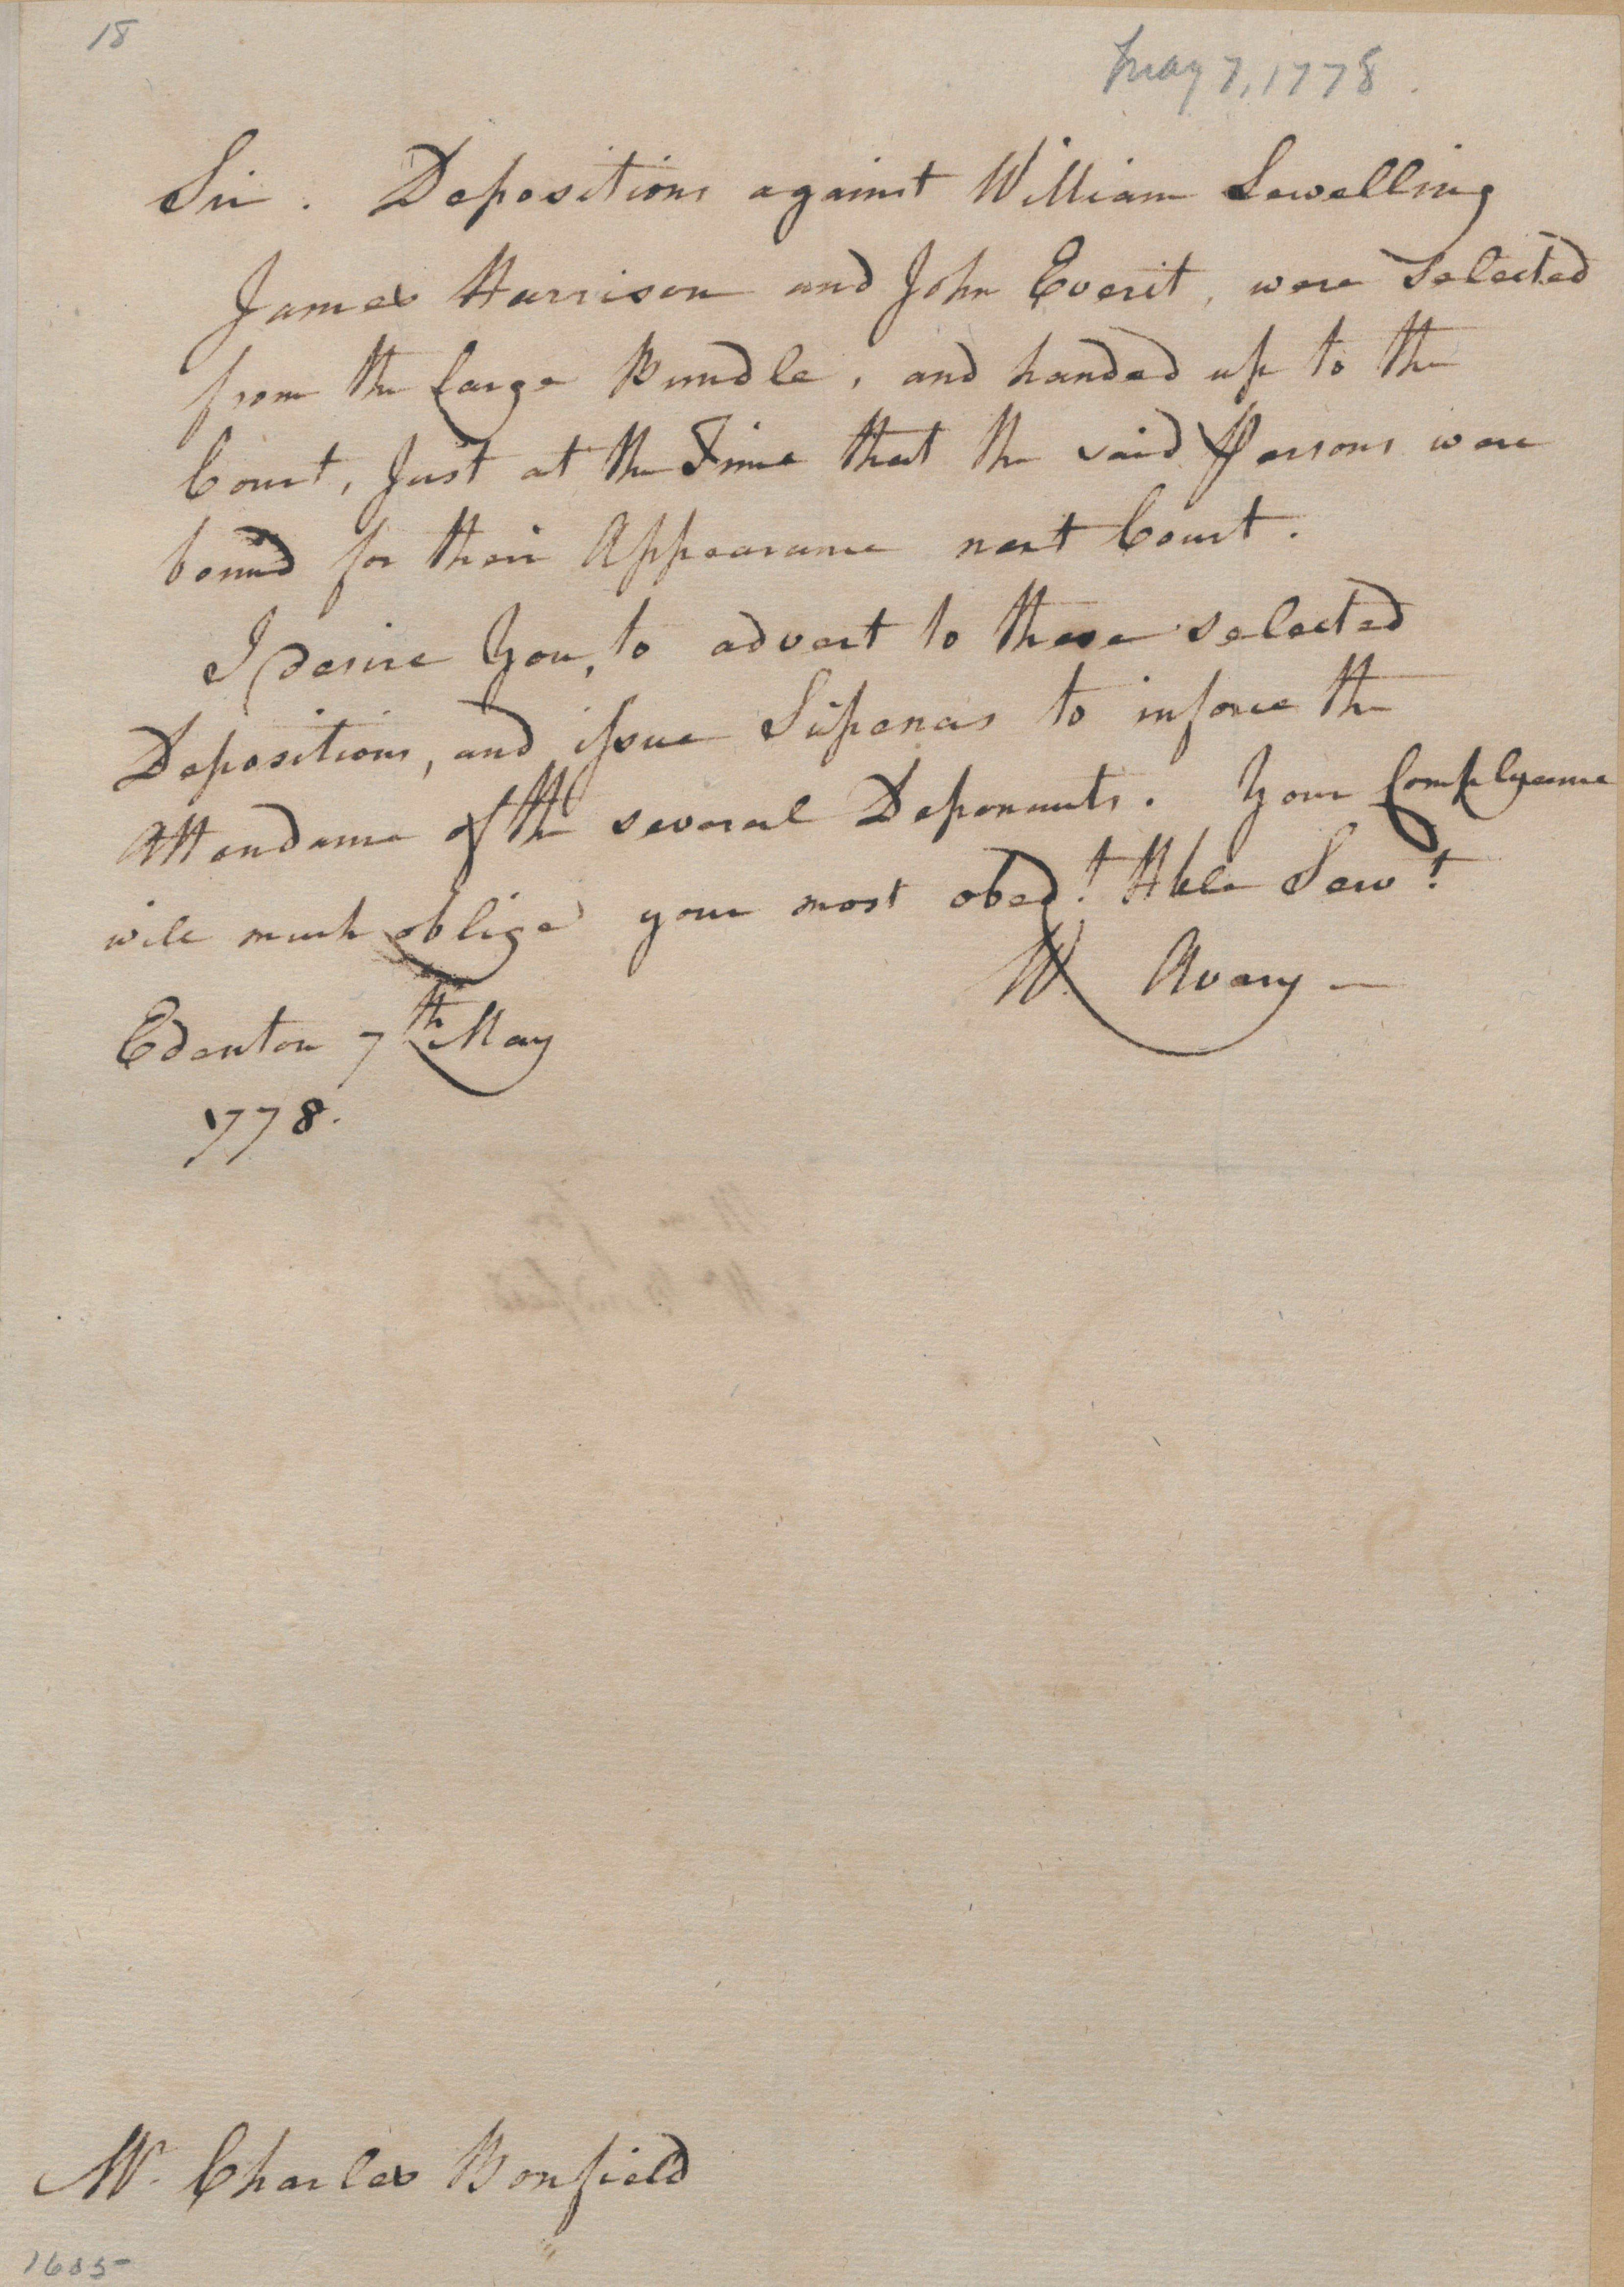 Letter from Waightstill Avery to Charles Bondfield, 7 May 1778, page 1